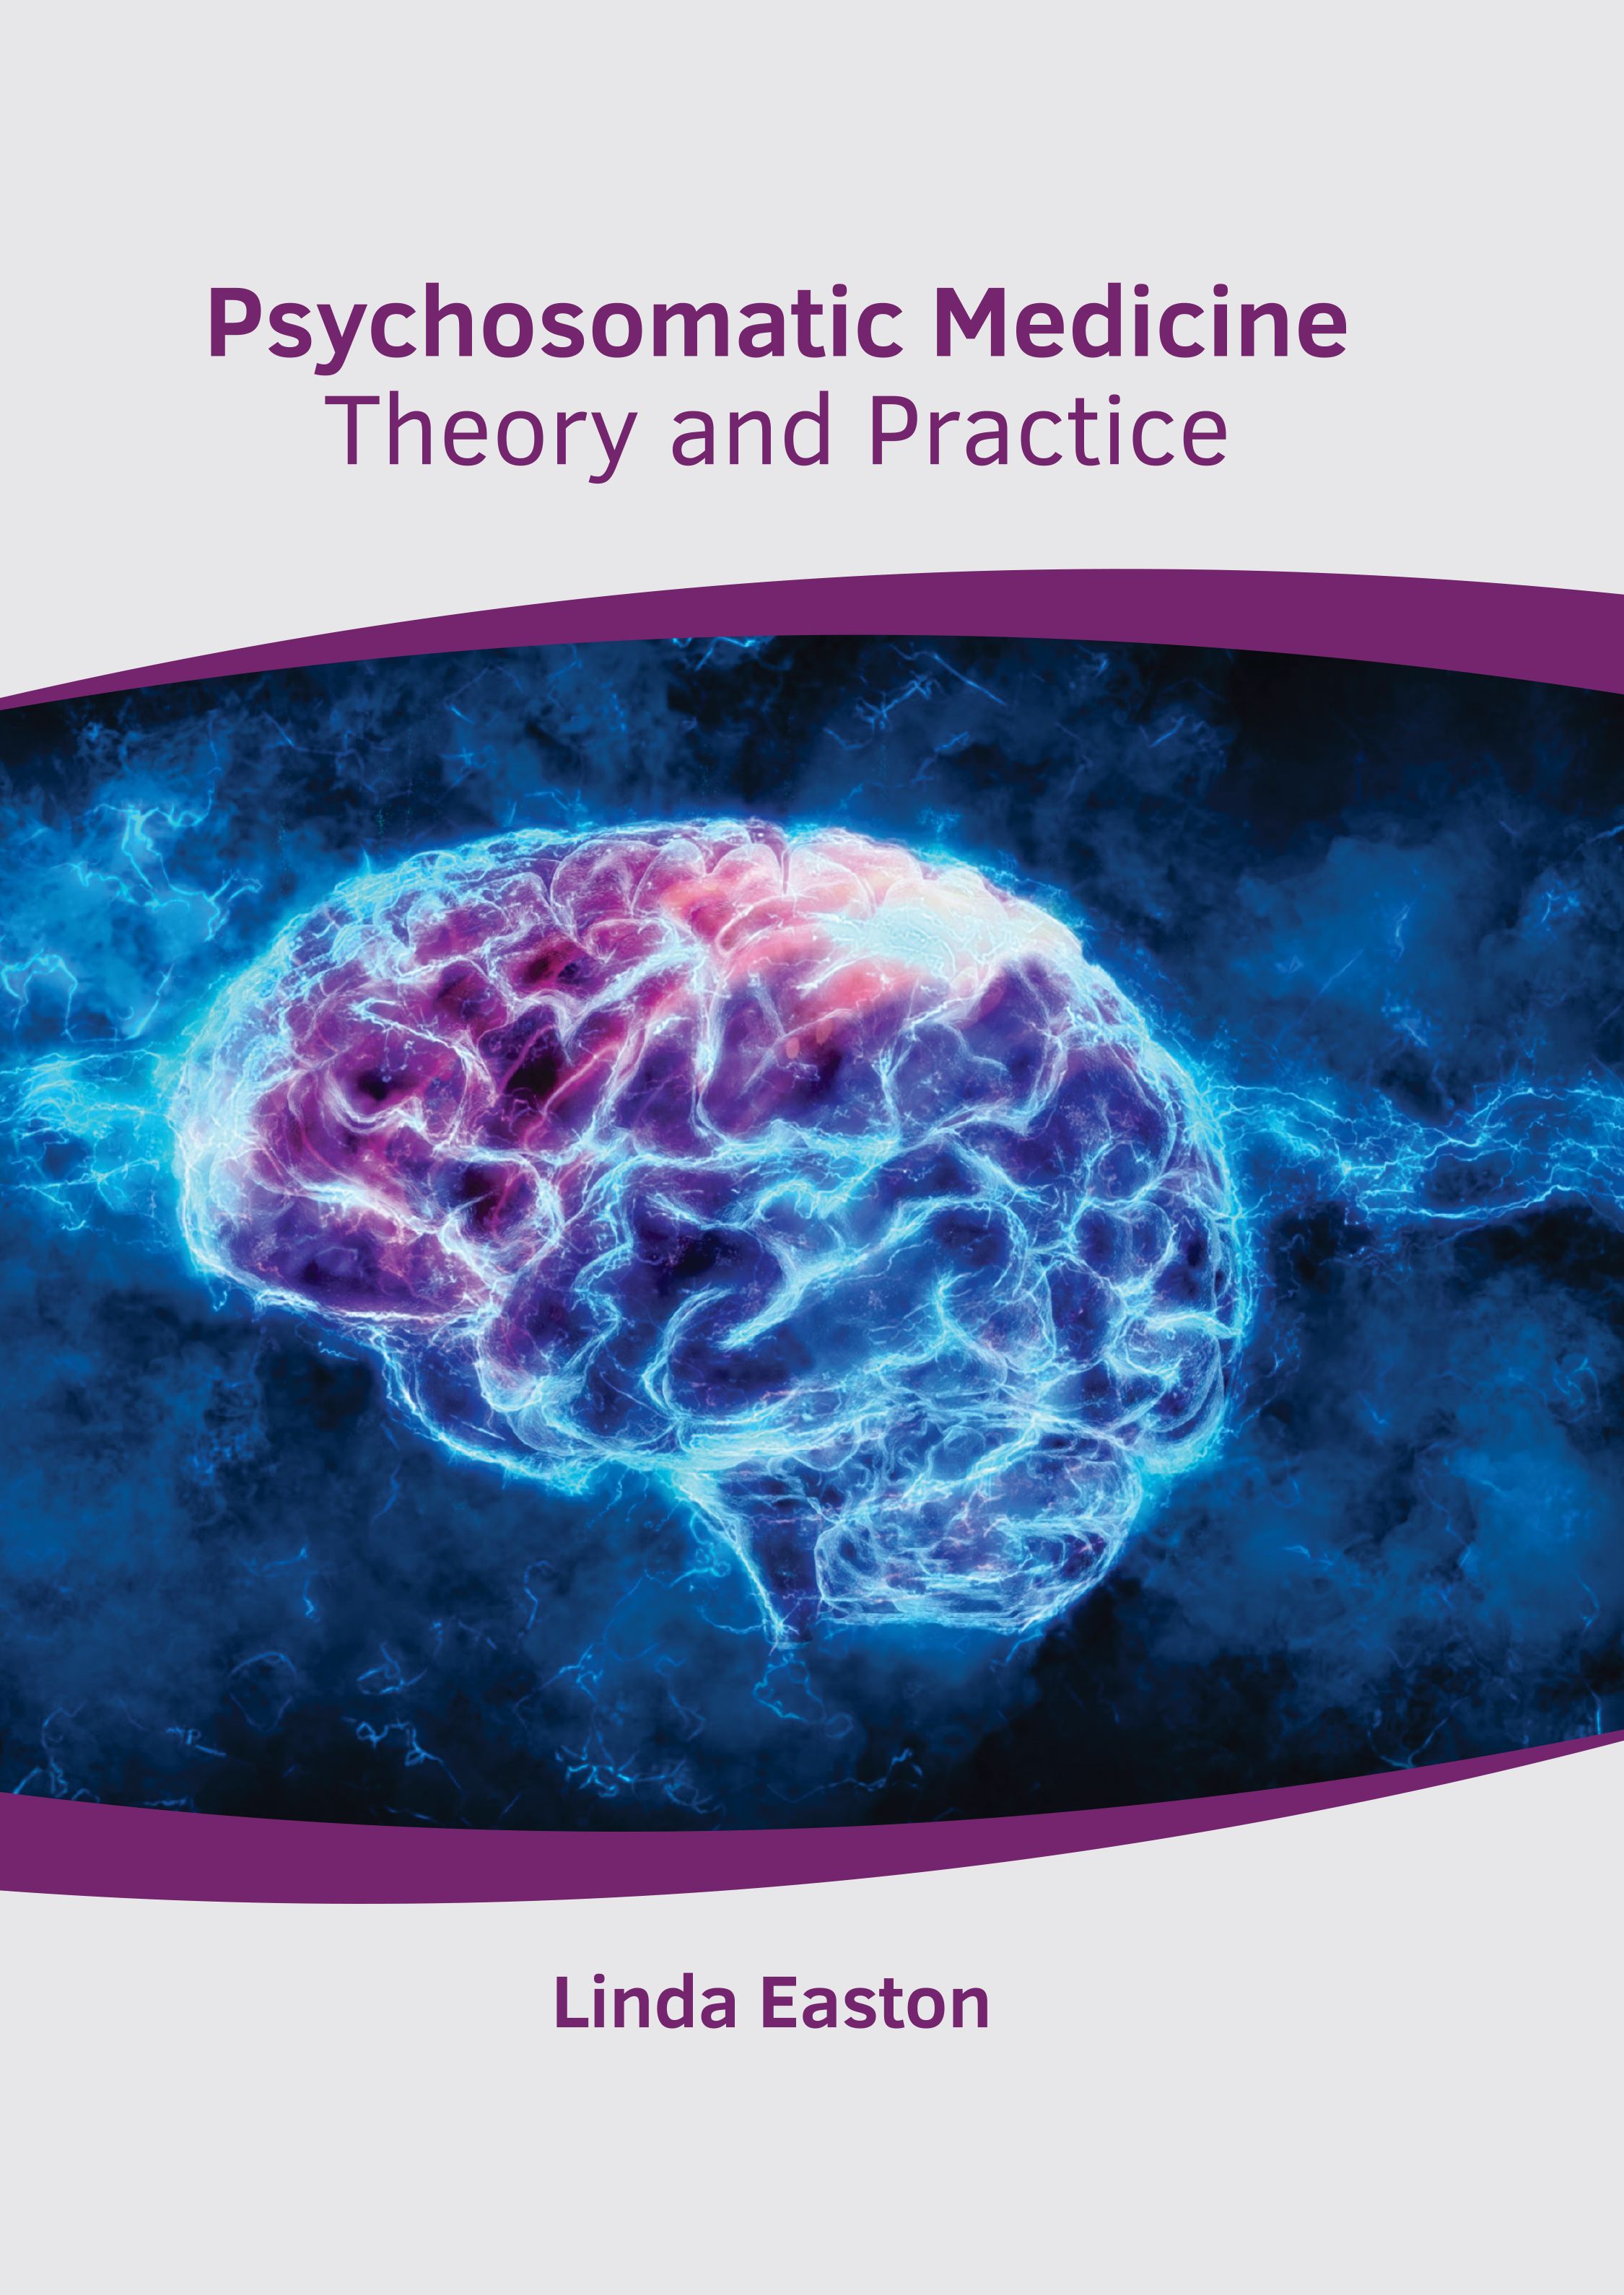 PSYCHOSOMATIC MEDICINE: THEORY AND PRACTICE